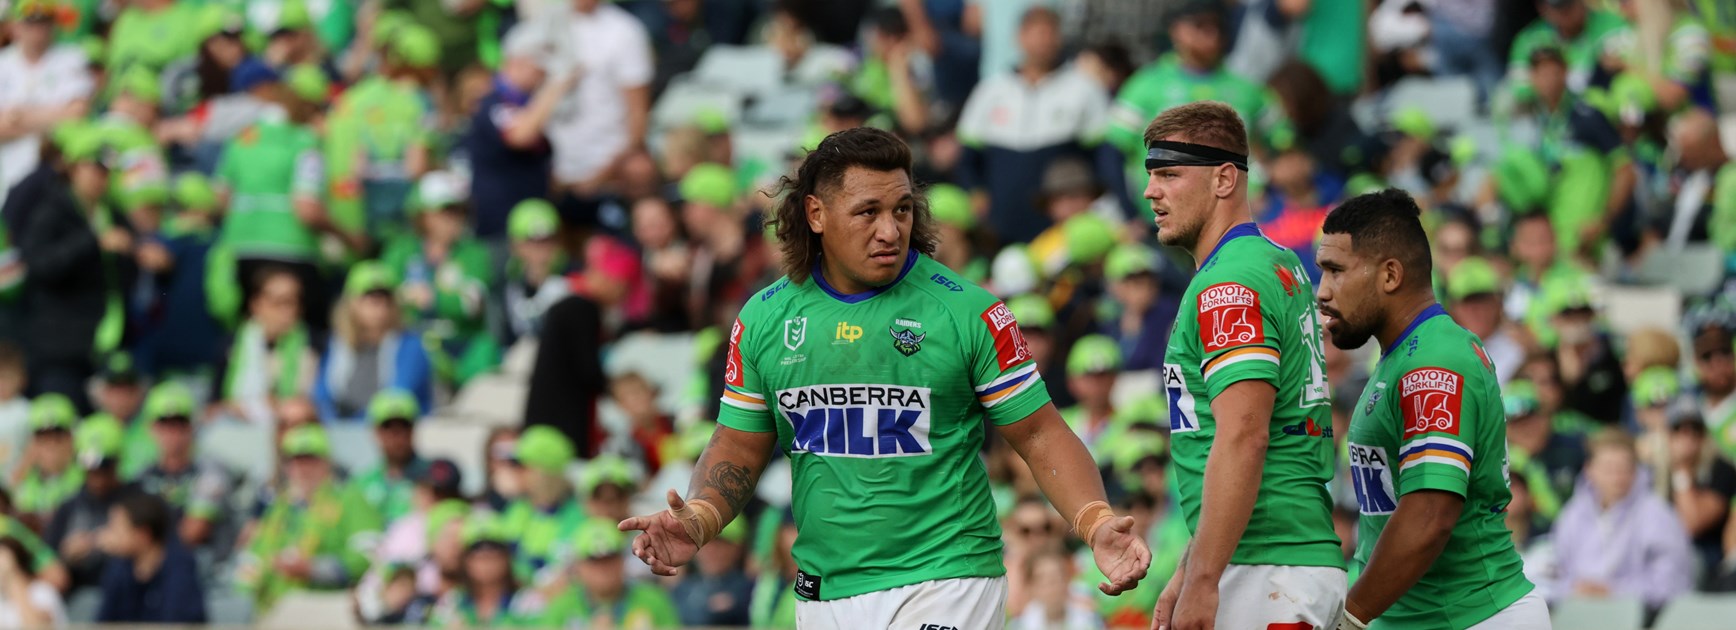 Opposition in focus: Canberra Raiders